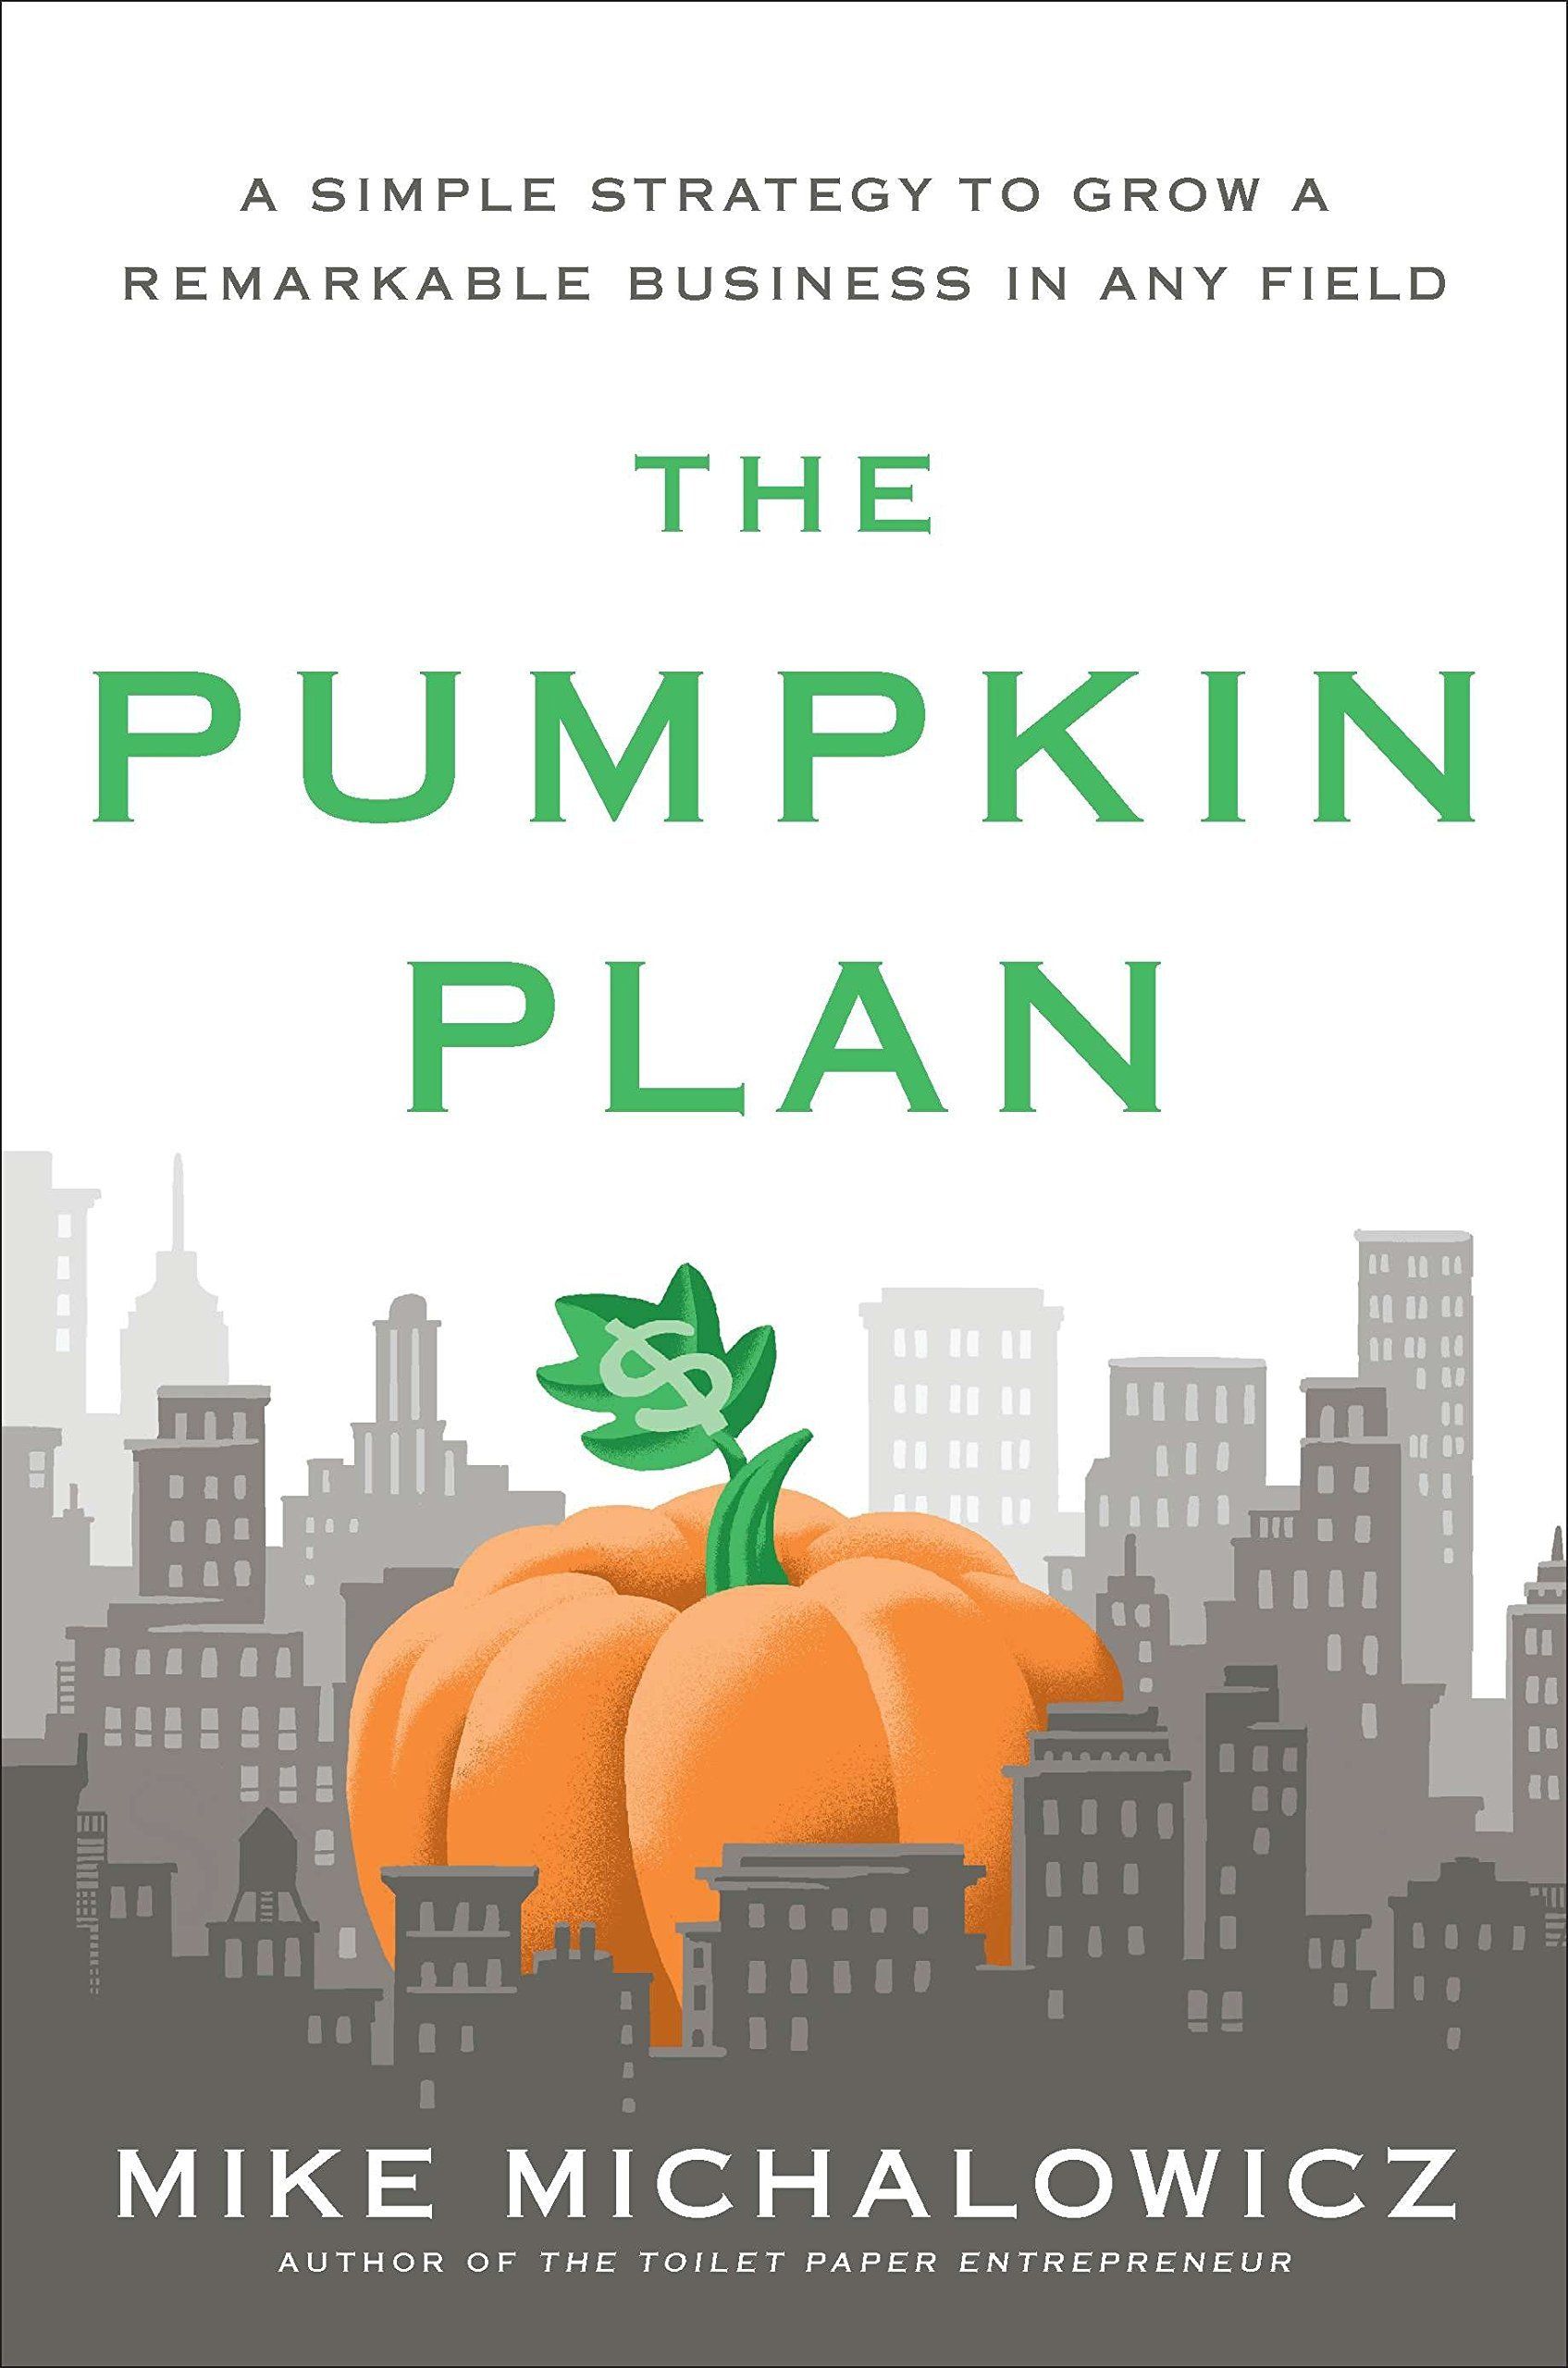 The book, The Pumpkin Plan, by Mike Michalowicz